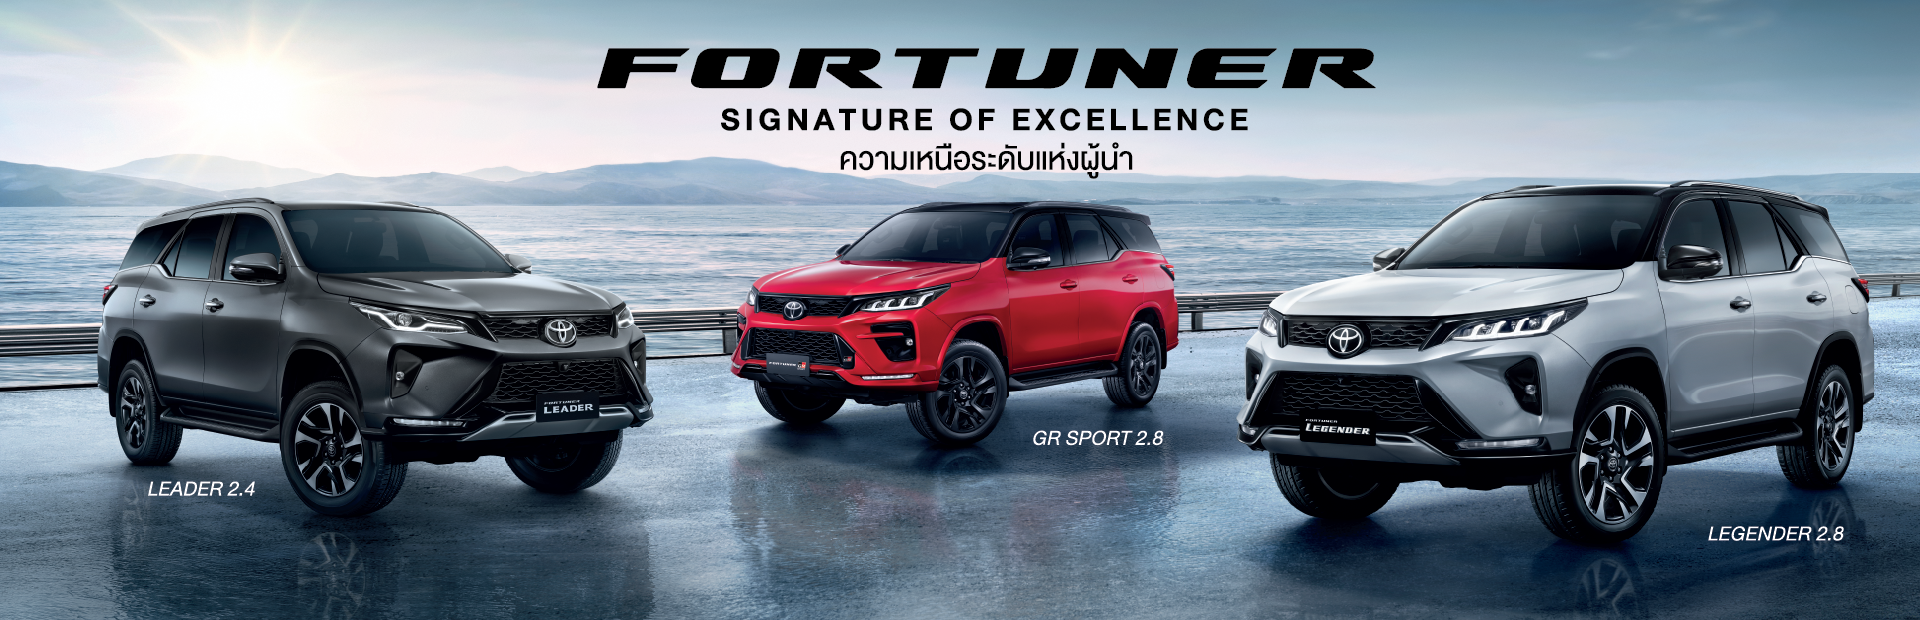 FORTUNER SIGNATURE OF EXCELLENCE